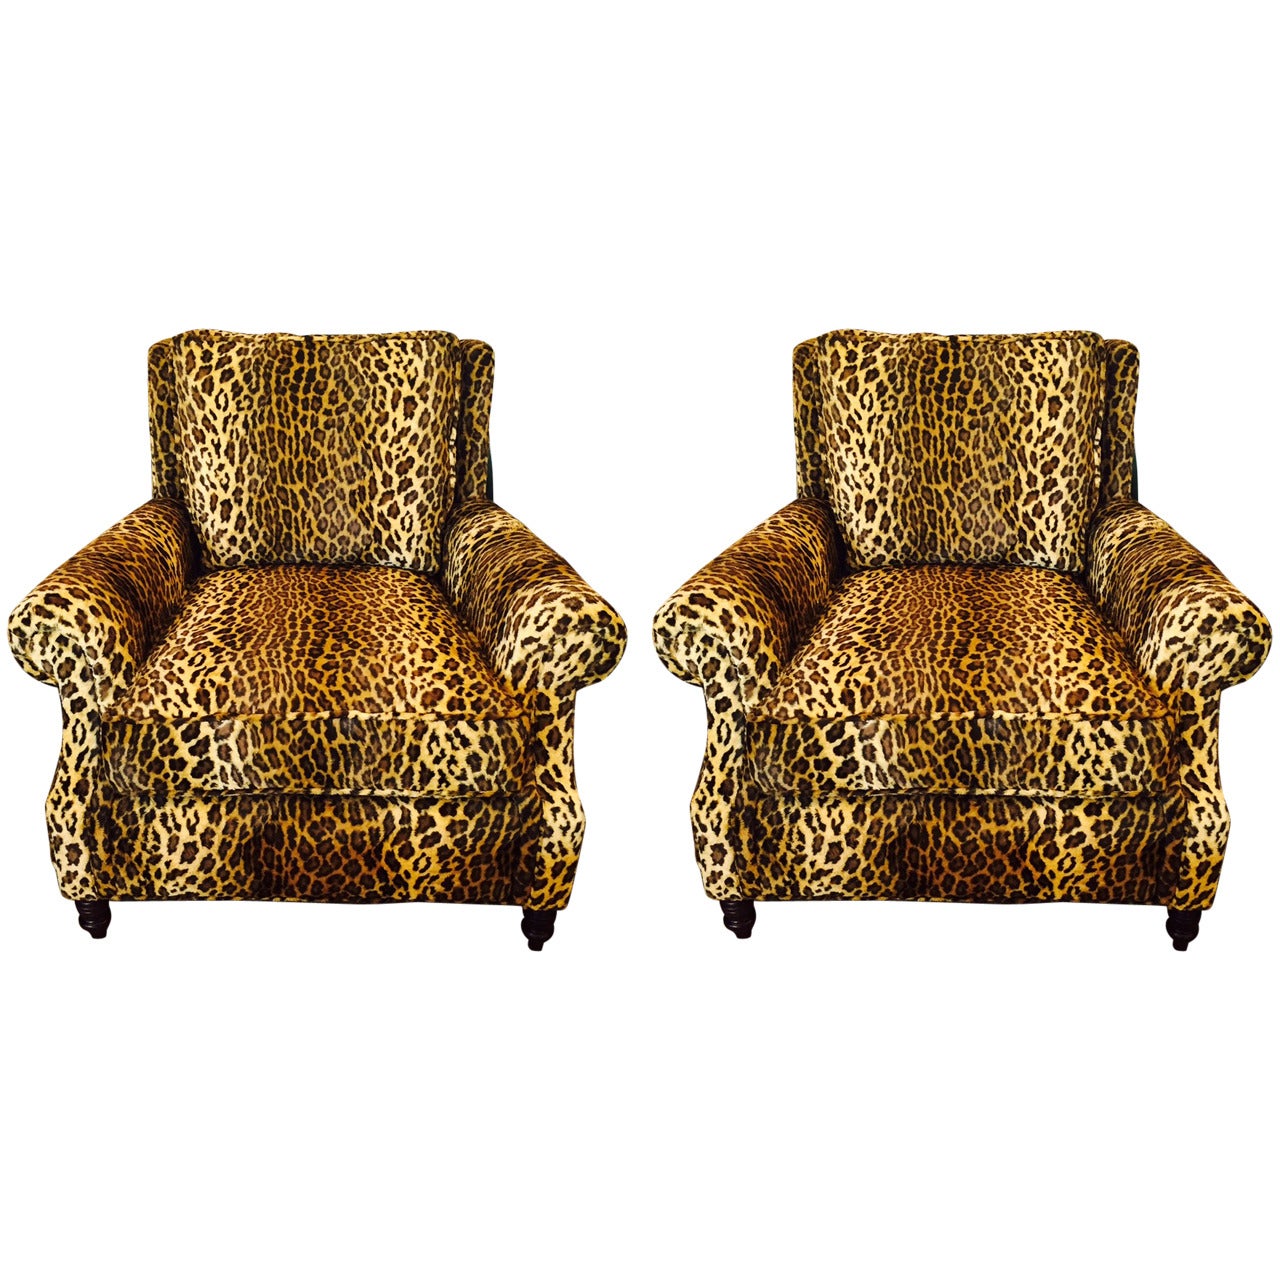 Pair of Luscious Leopard Upholstered Custom Club Chairs